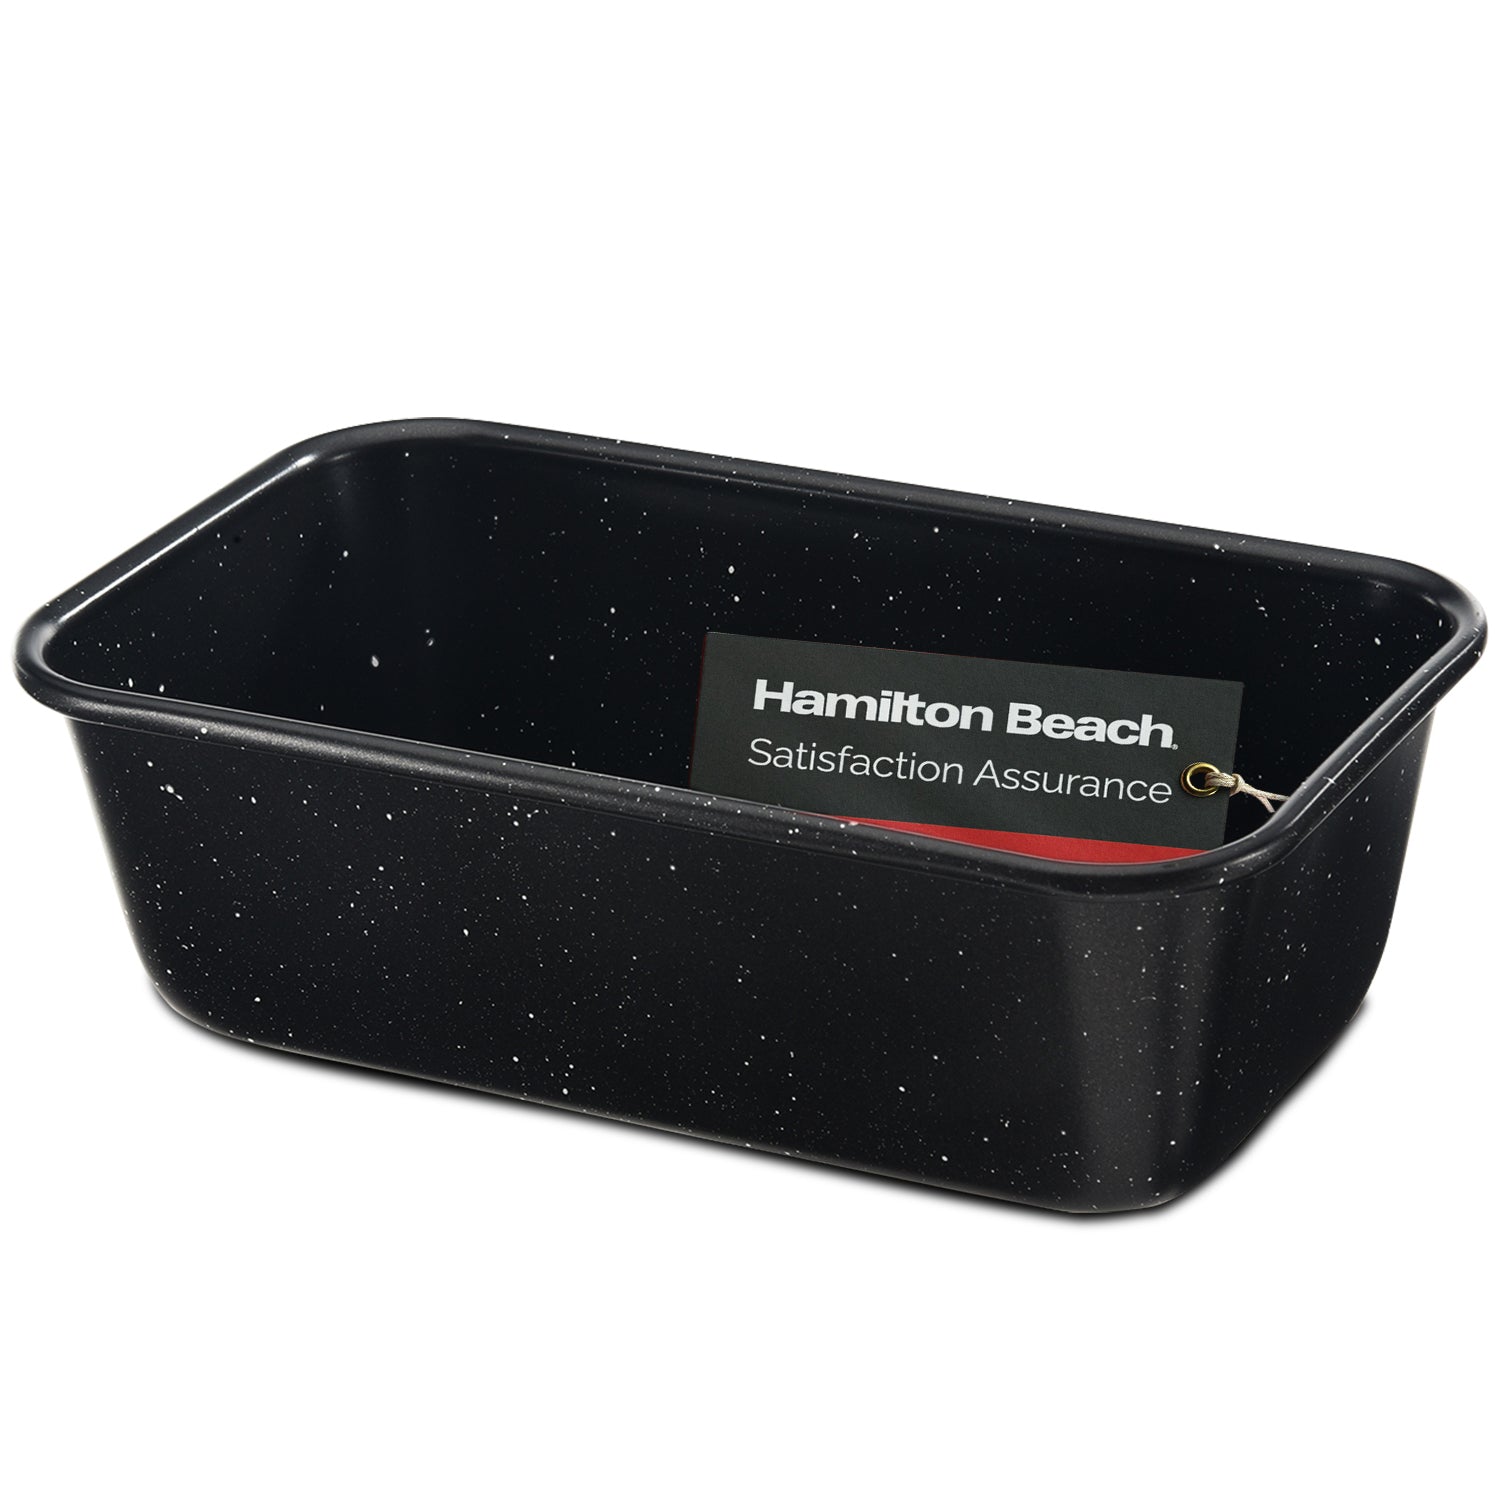 Hamilton Beach Carbon Steel Loaf Pan Black Nonstick with Marble Coatin